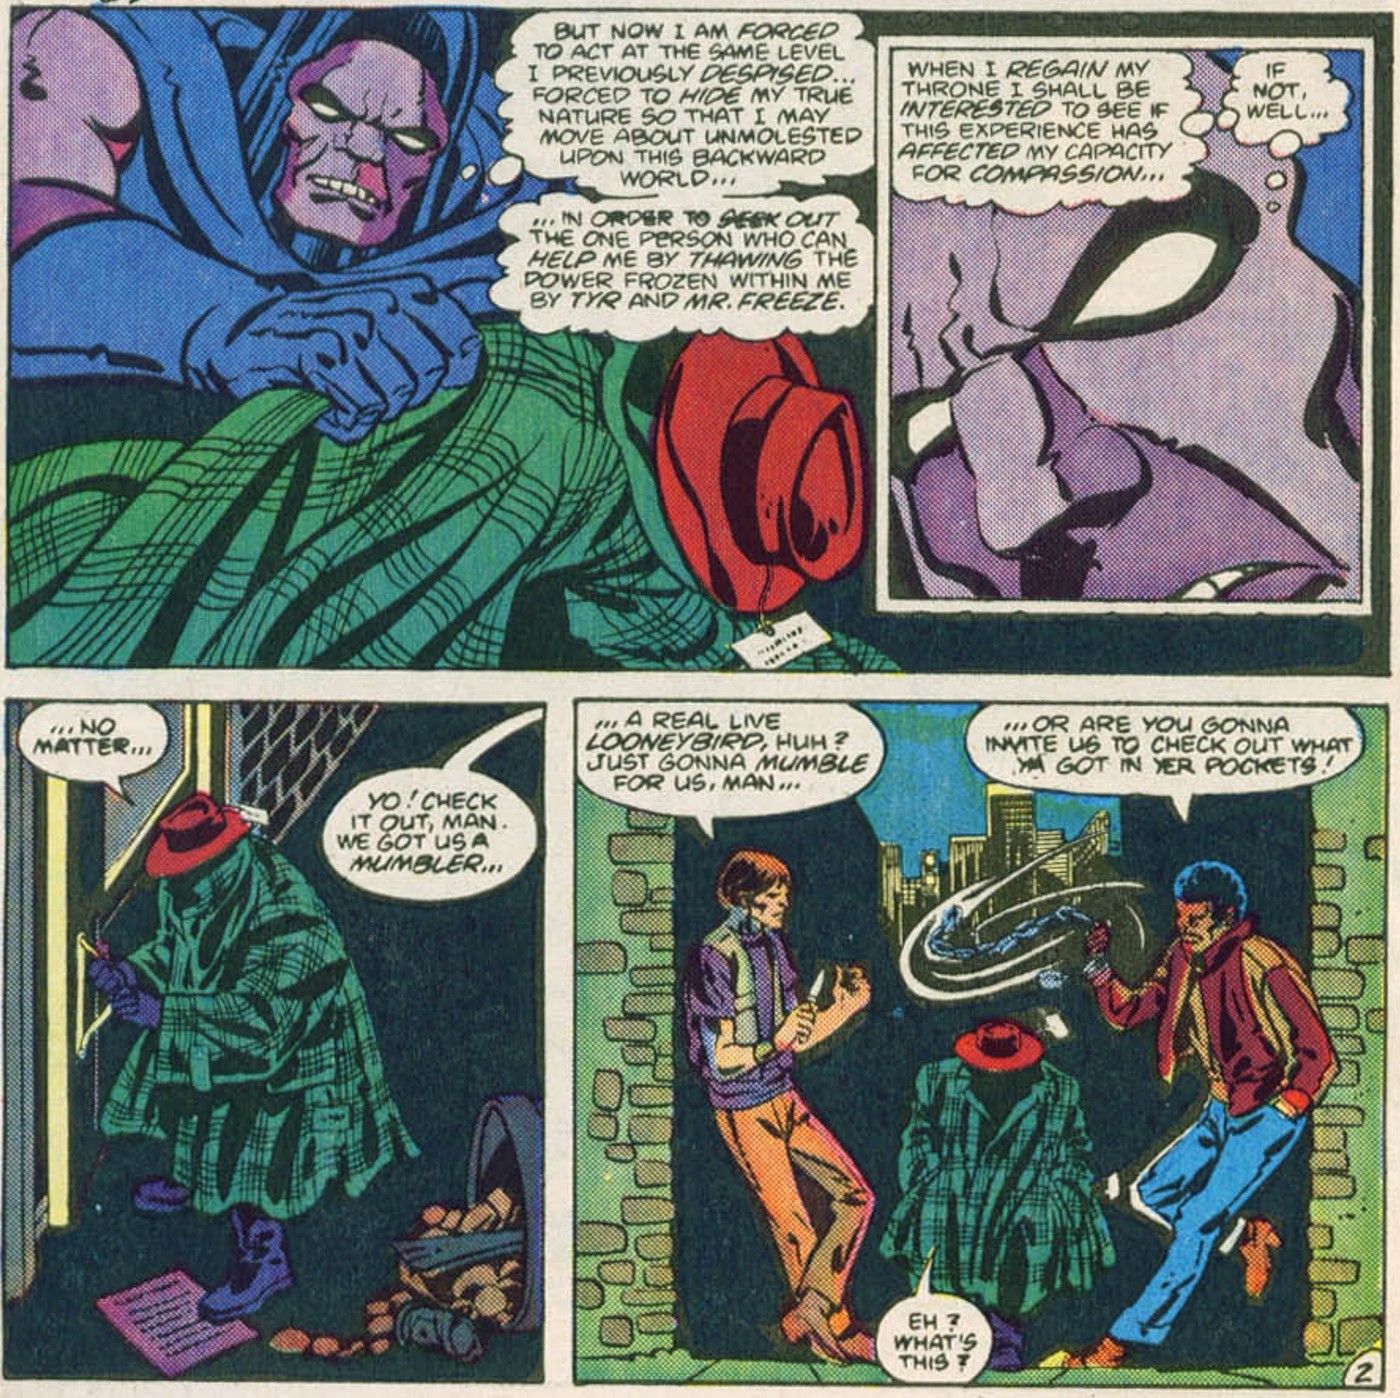 Comic book panels: Darkseid puts on a green coat as two thugs from Metropolis watch him.